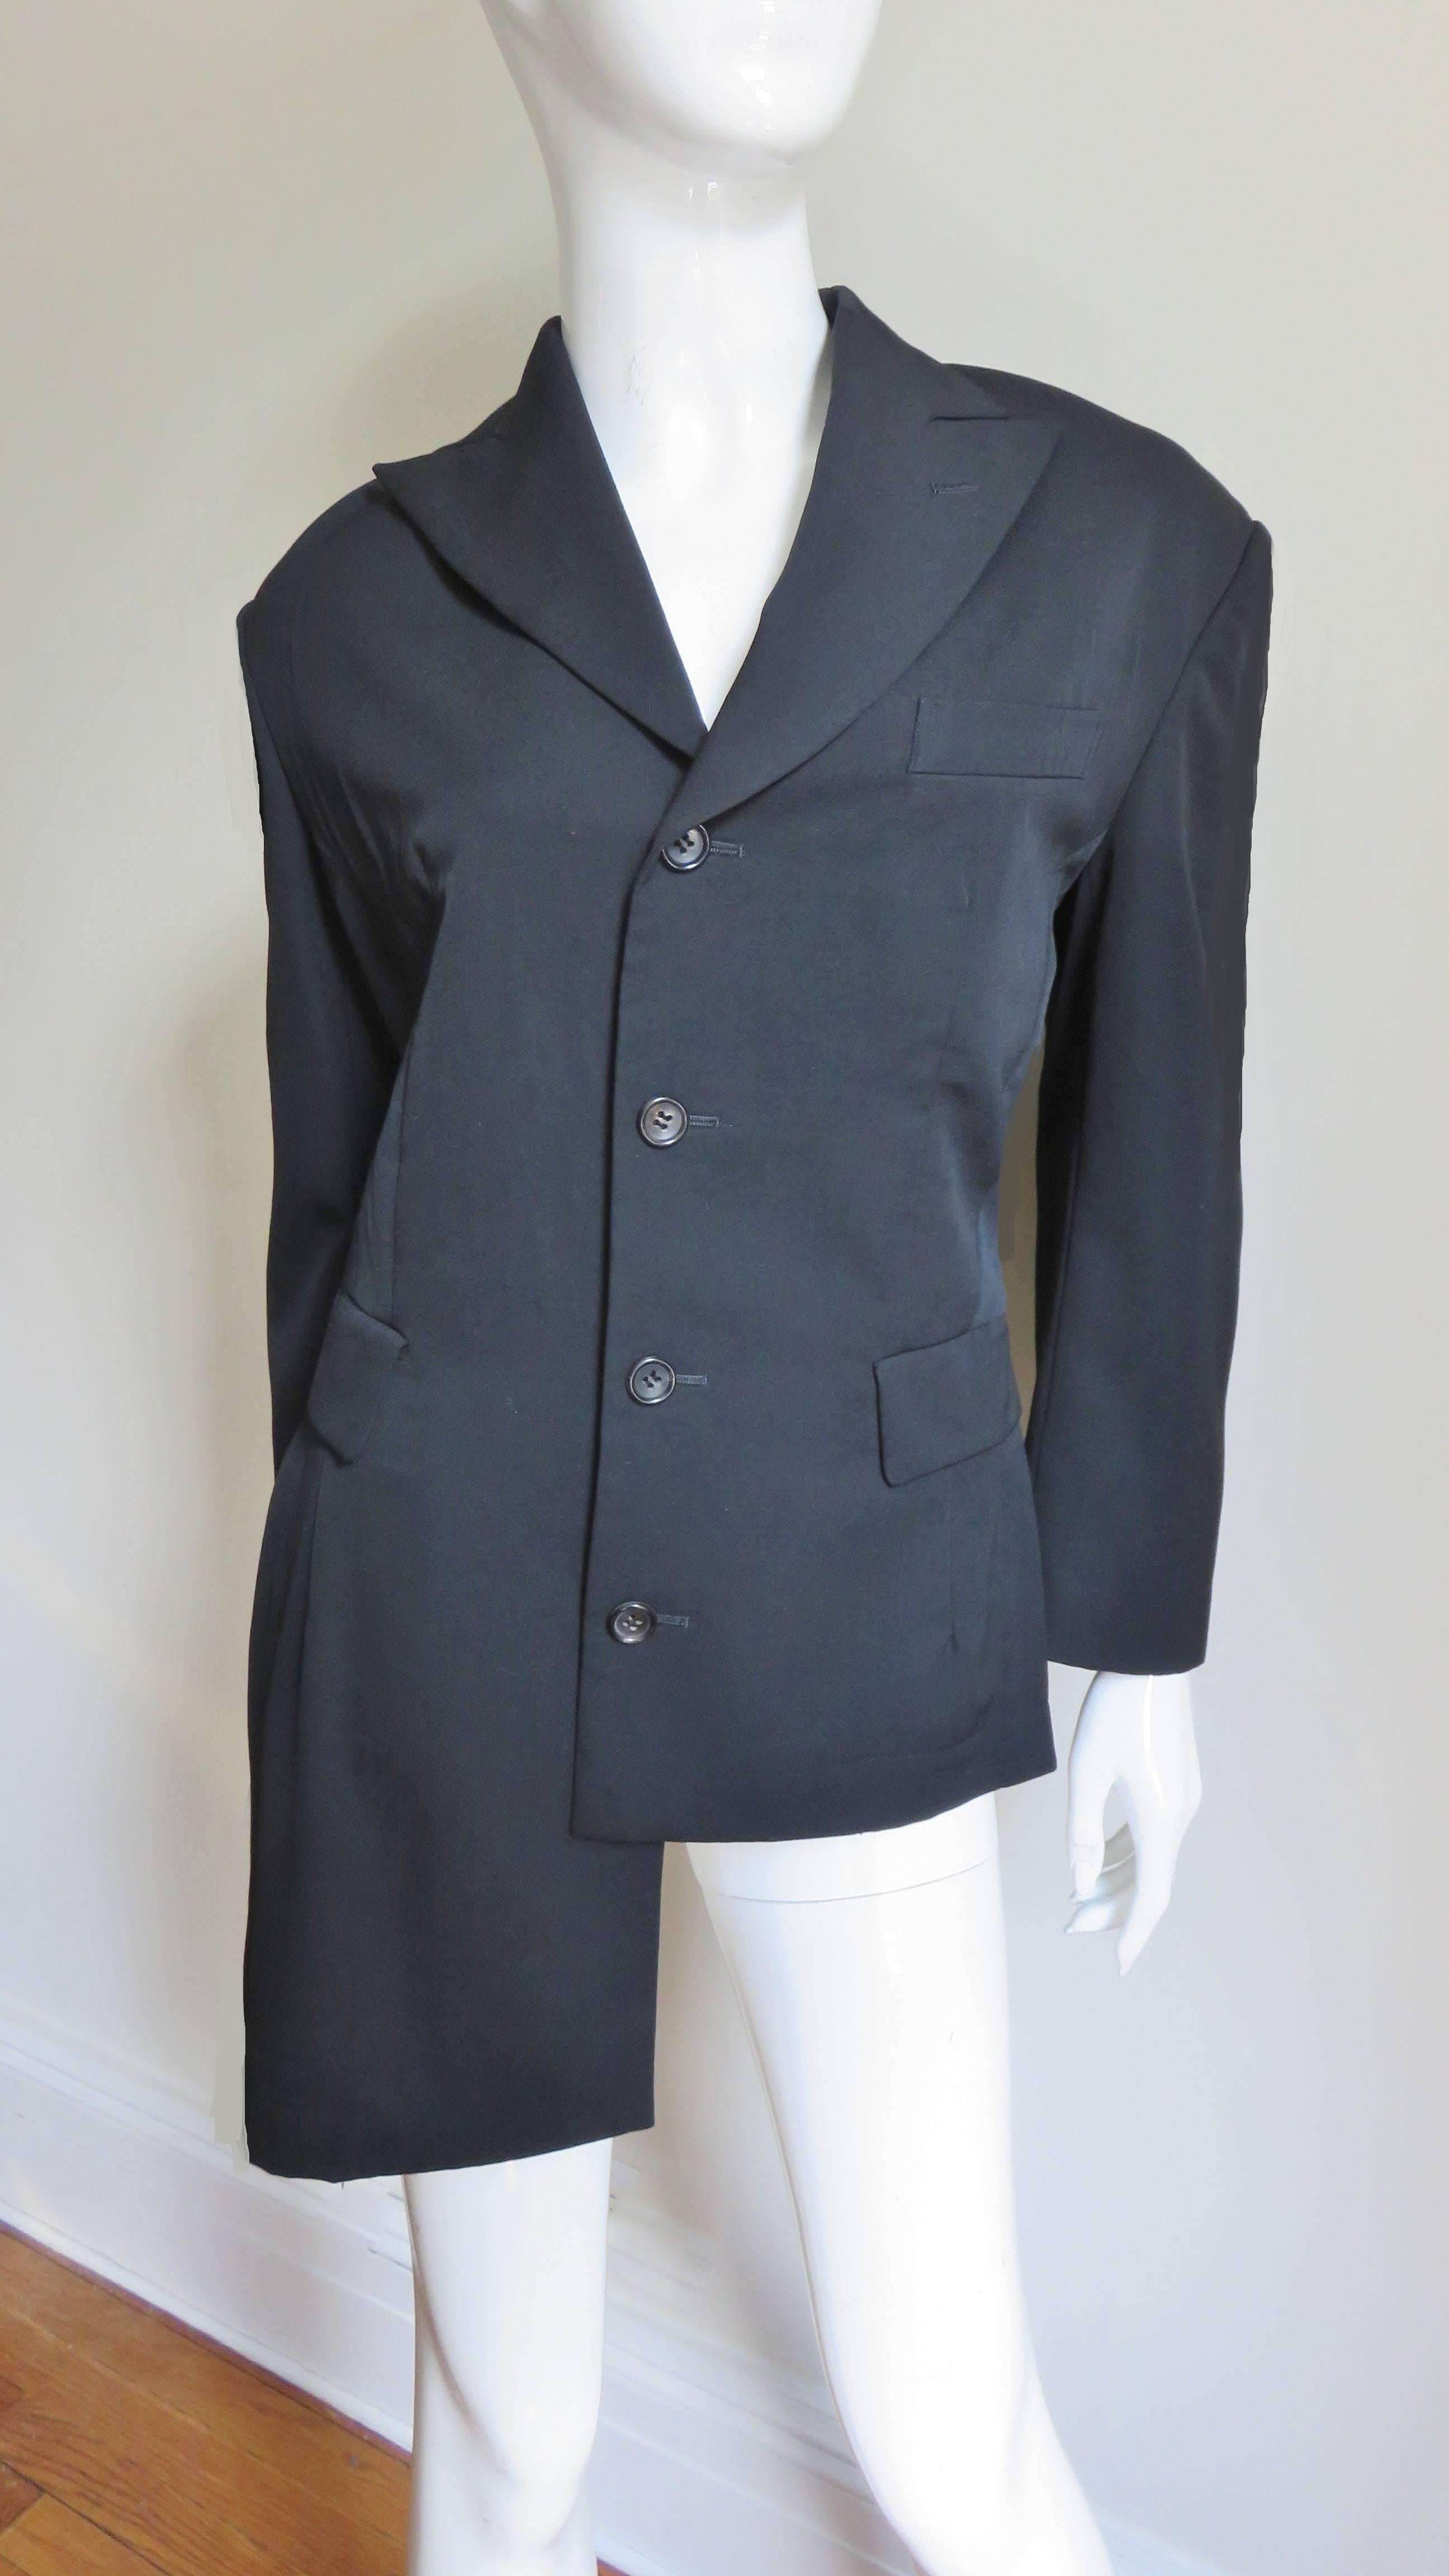 An incredible black light weight wool jacket from Comme des Garcons, CDG.  It is fitted at the waist with princess seams and has long sleeves, peak lapels and 2 flap welt pockets front pockets and 1 breast pocket.  It is stunning with the asymmetric